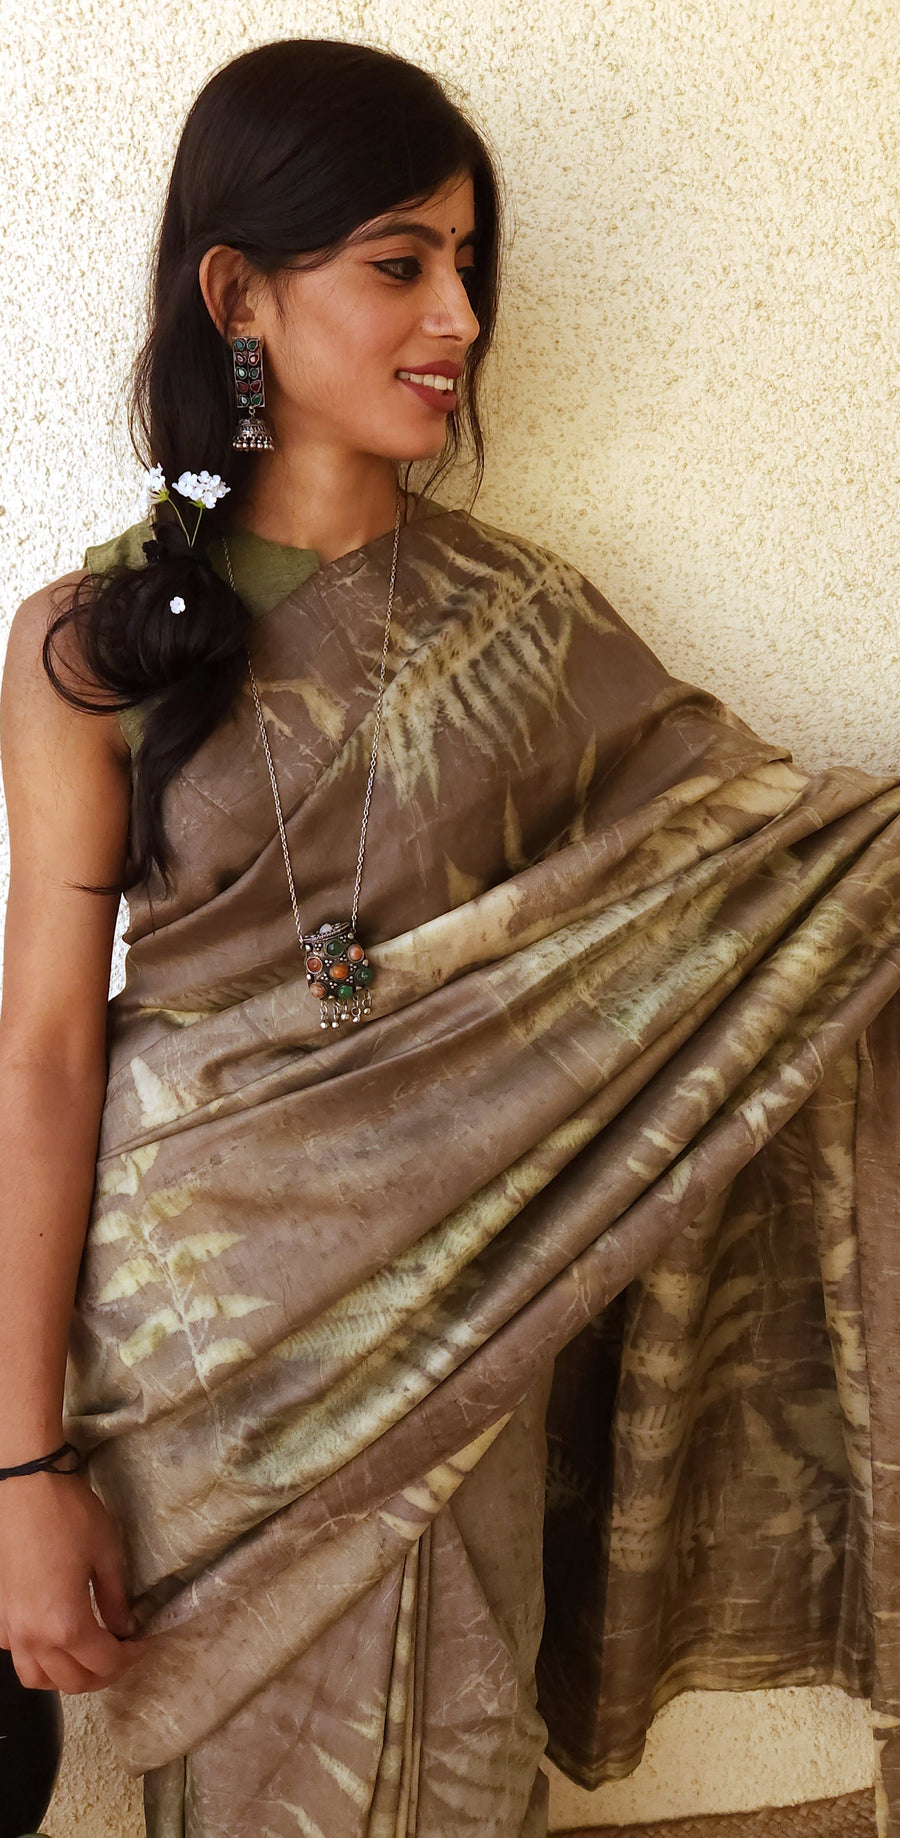 'LOST IN THE JUNGLE' Eco- printed handloom Mulberry Silk